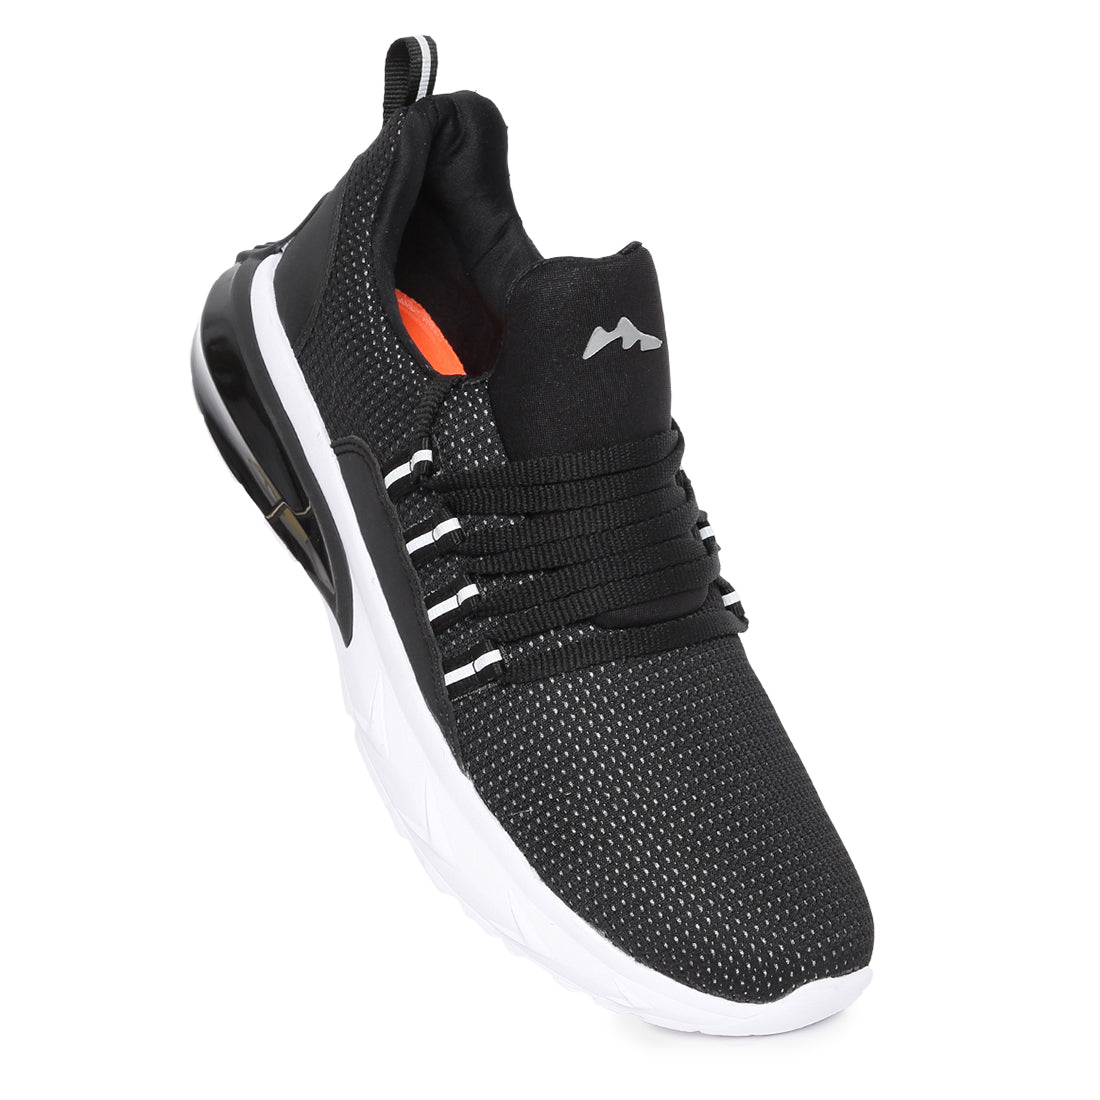 Stimulus FBSTG6011A Black Comfortable Daily Outdoor Sports Shoes For Men